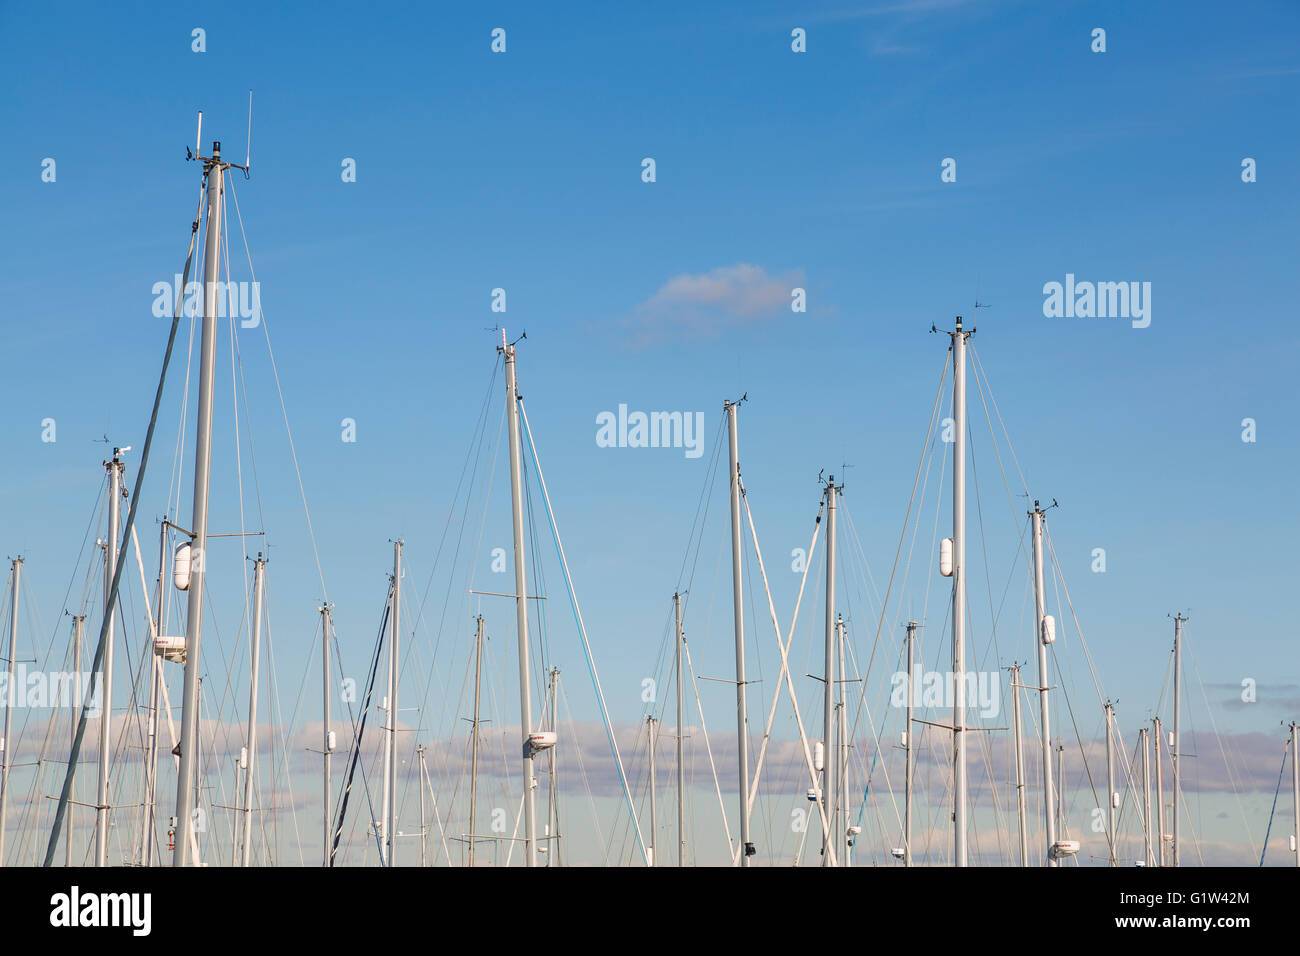 Boat sailing masts against the sky Stock Photo